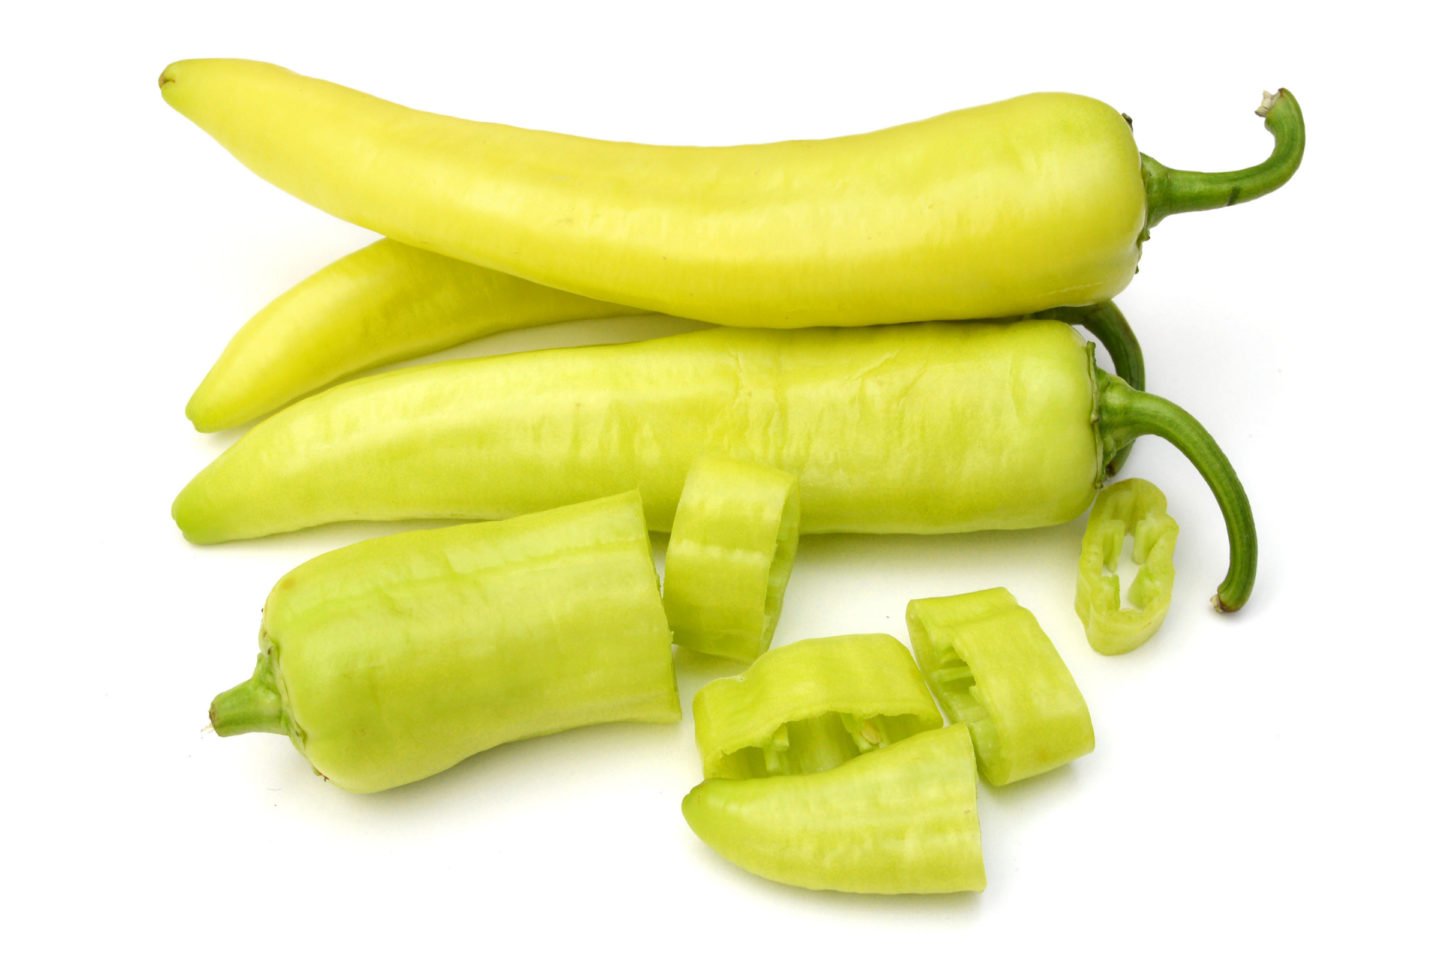 banana peppers are good poblano pepper substitutes